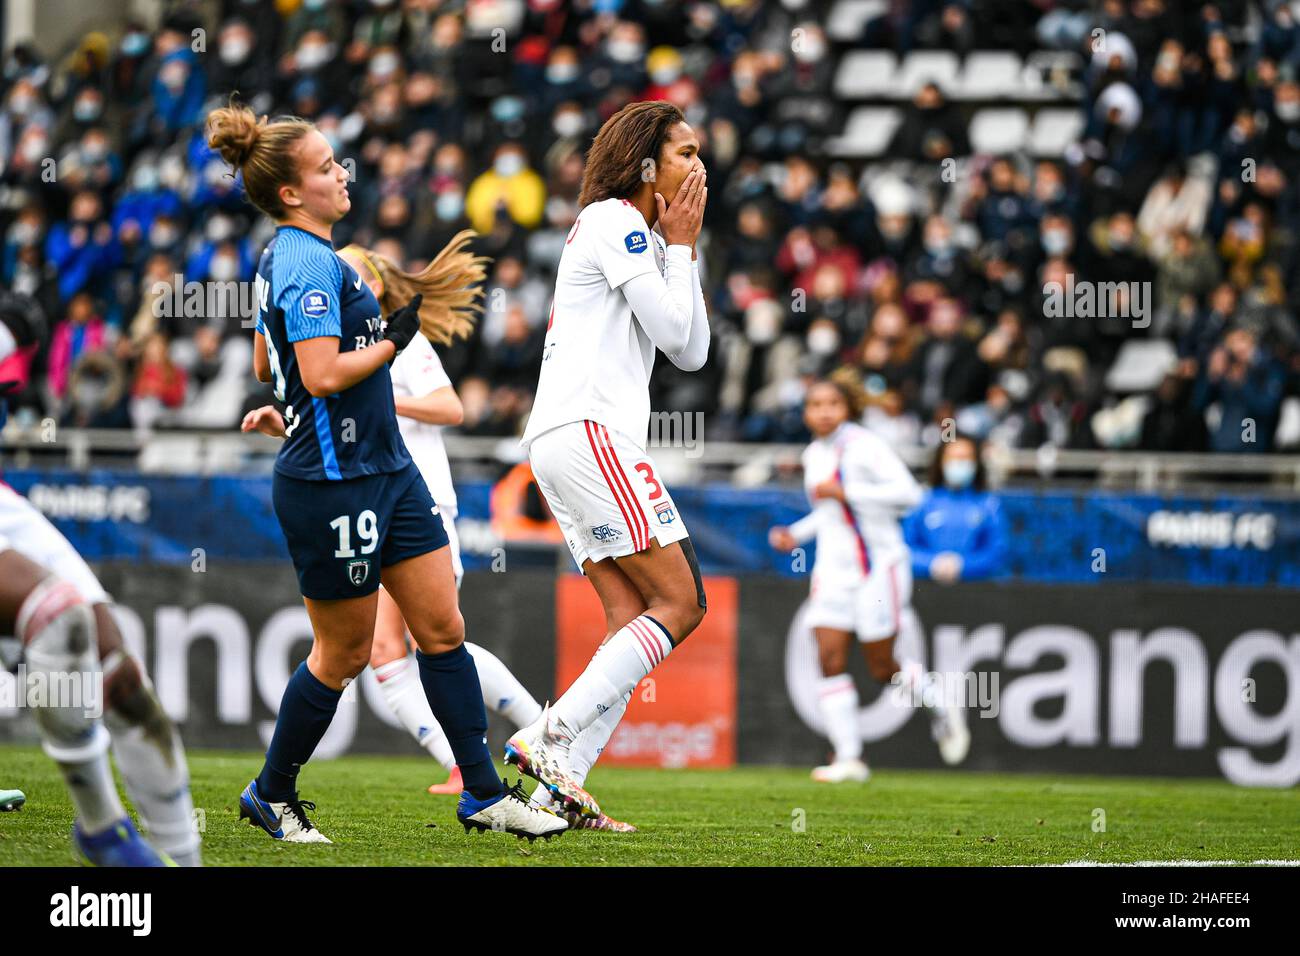 Paris, France. 12th Dec, 2021. Wendie Renard of Olympique Lyonnais during the Women's French championship, D1 Arkema football match between Paris FC and Olympique Lyonnais (OL) on December 12, 2021 at Charlety Stadium in Paris, France. Photo by Victor Joly/ABACAPRESS.COM Credit: Victor Joly/Alamy Live News Stock Photo